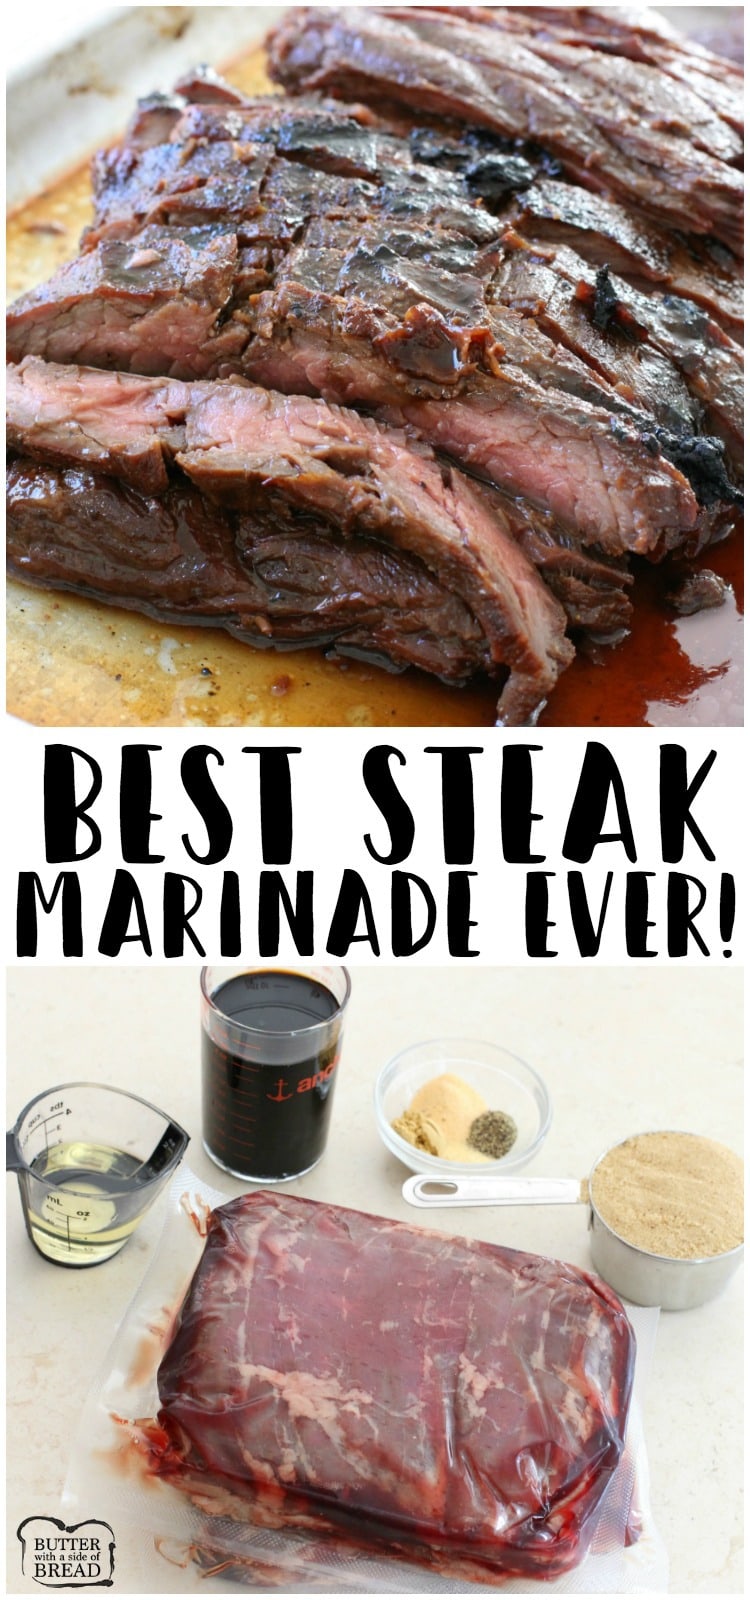 Steak marinade for the best steak of your life! Made with soy sauce, brown sugar, olive oil, ginger and garlic; you'll never taste a better steak marinade! Comes together in minutes and you won't believe the incredible flavor!